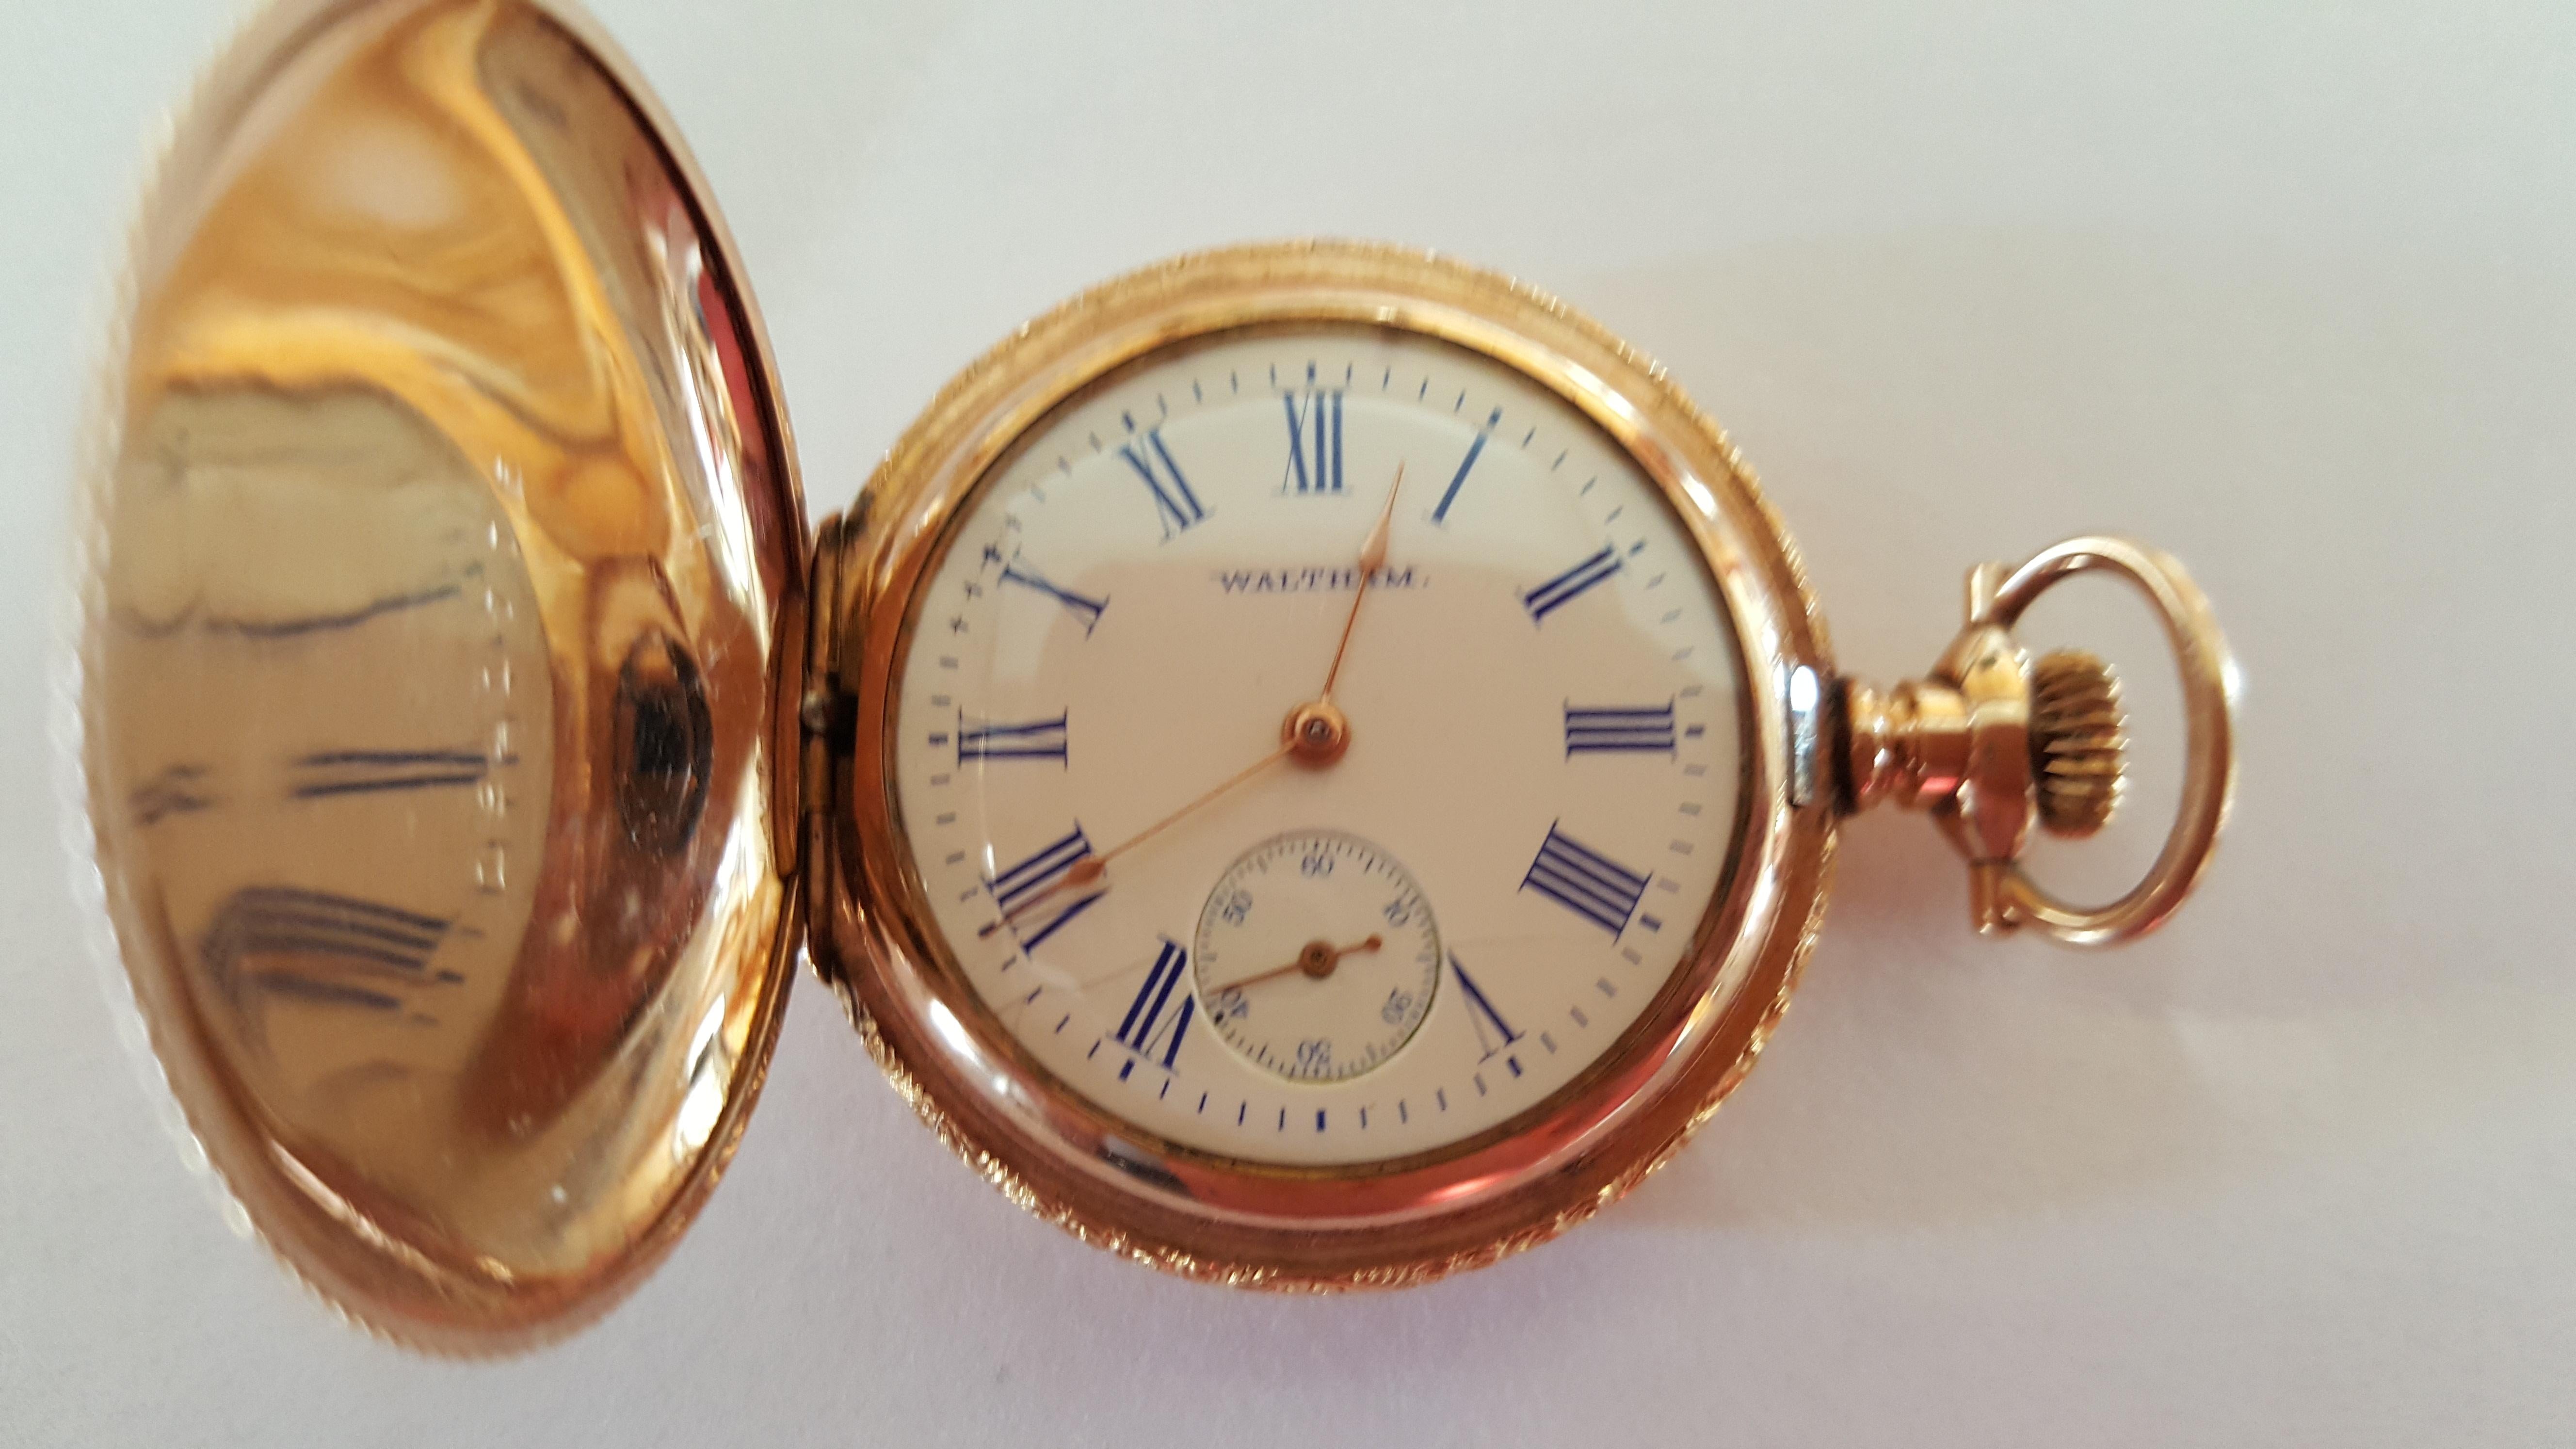 Vintage Waltham Pocket Watch, Gold Filled, Working, Pristine, 1907, 15 Jewel, Beautiful Engraving,  White Face, Blue Roman Numerals. This watch is in beautiful condition, 36mm in diameter and 10 mm thick. The inside of the case cover it's marked